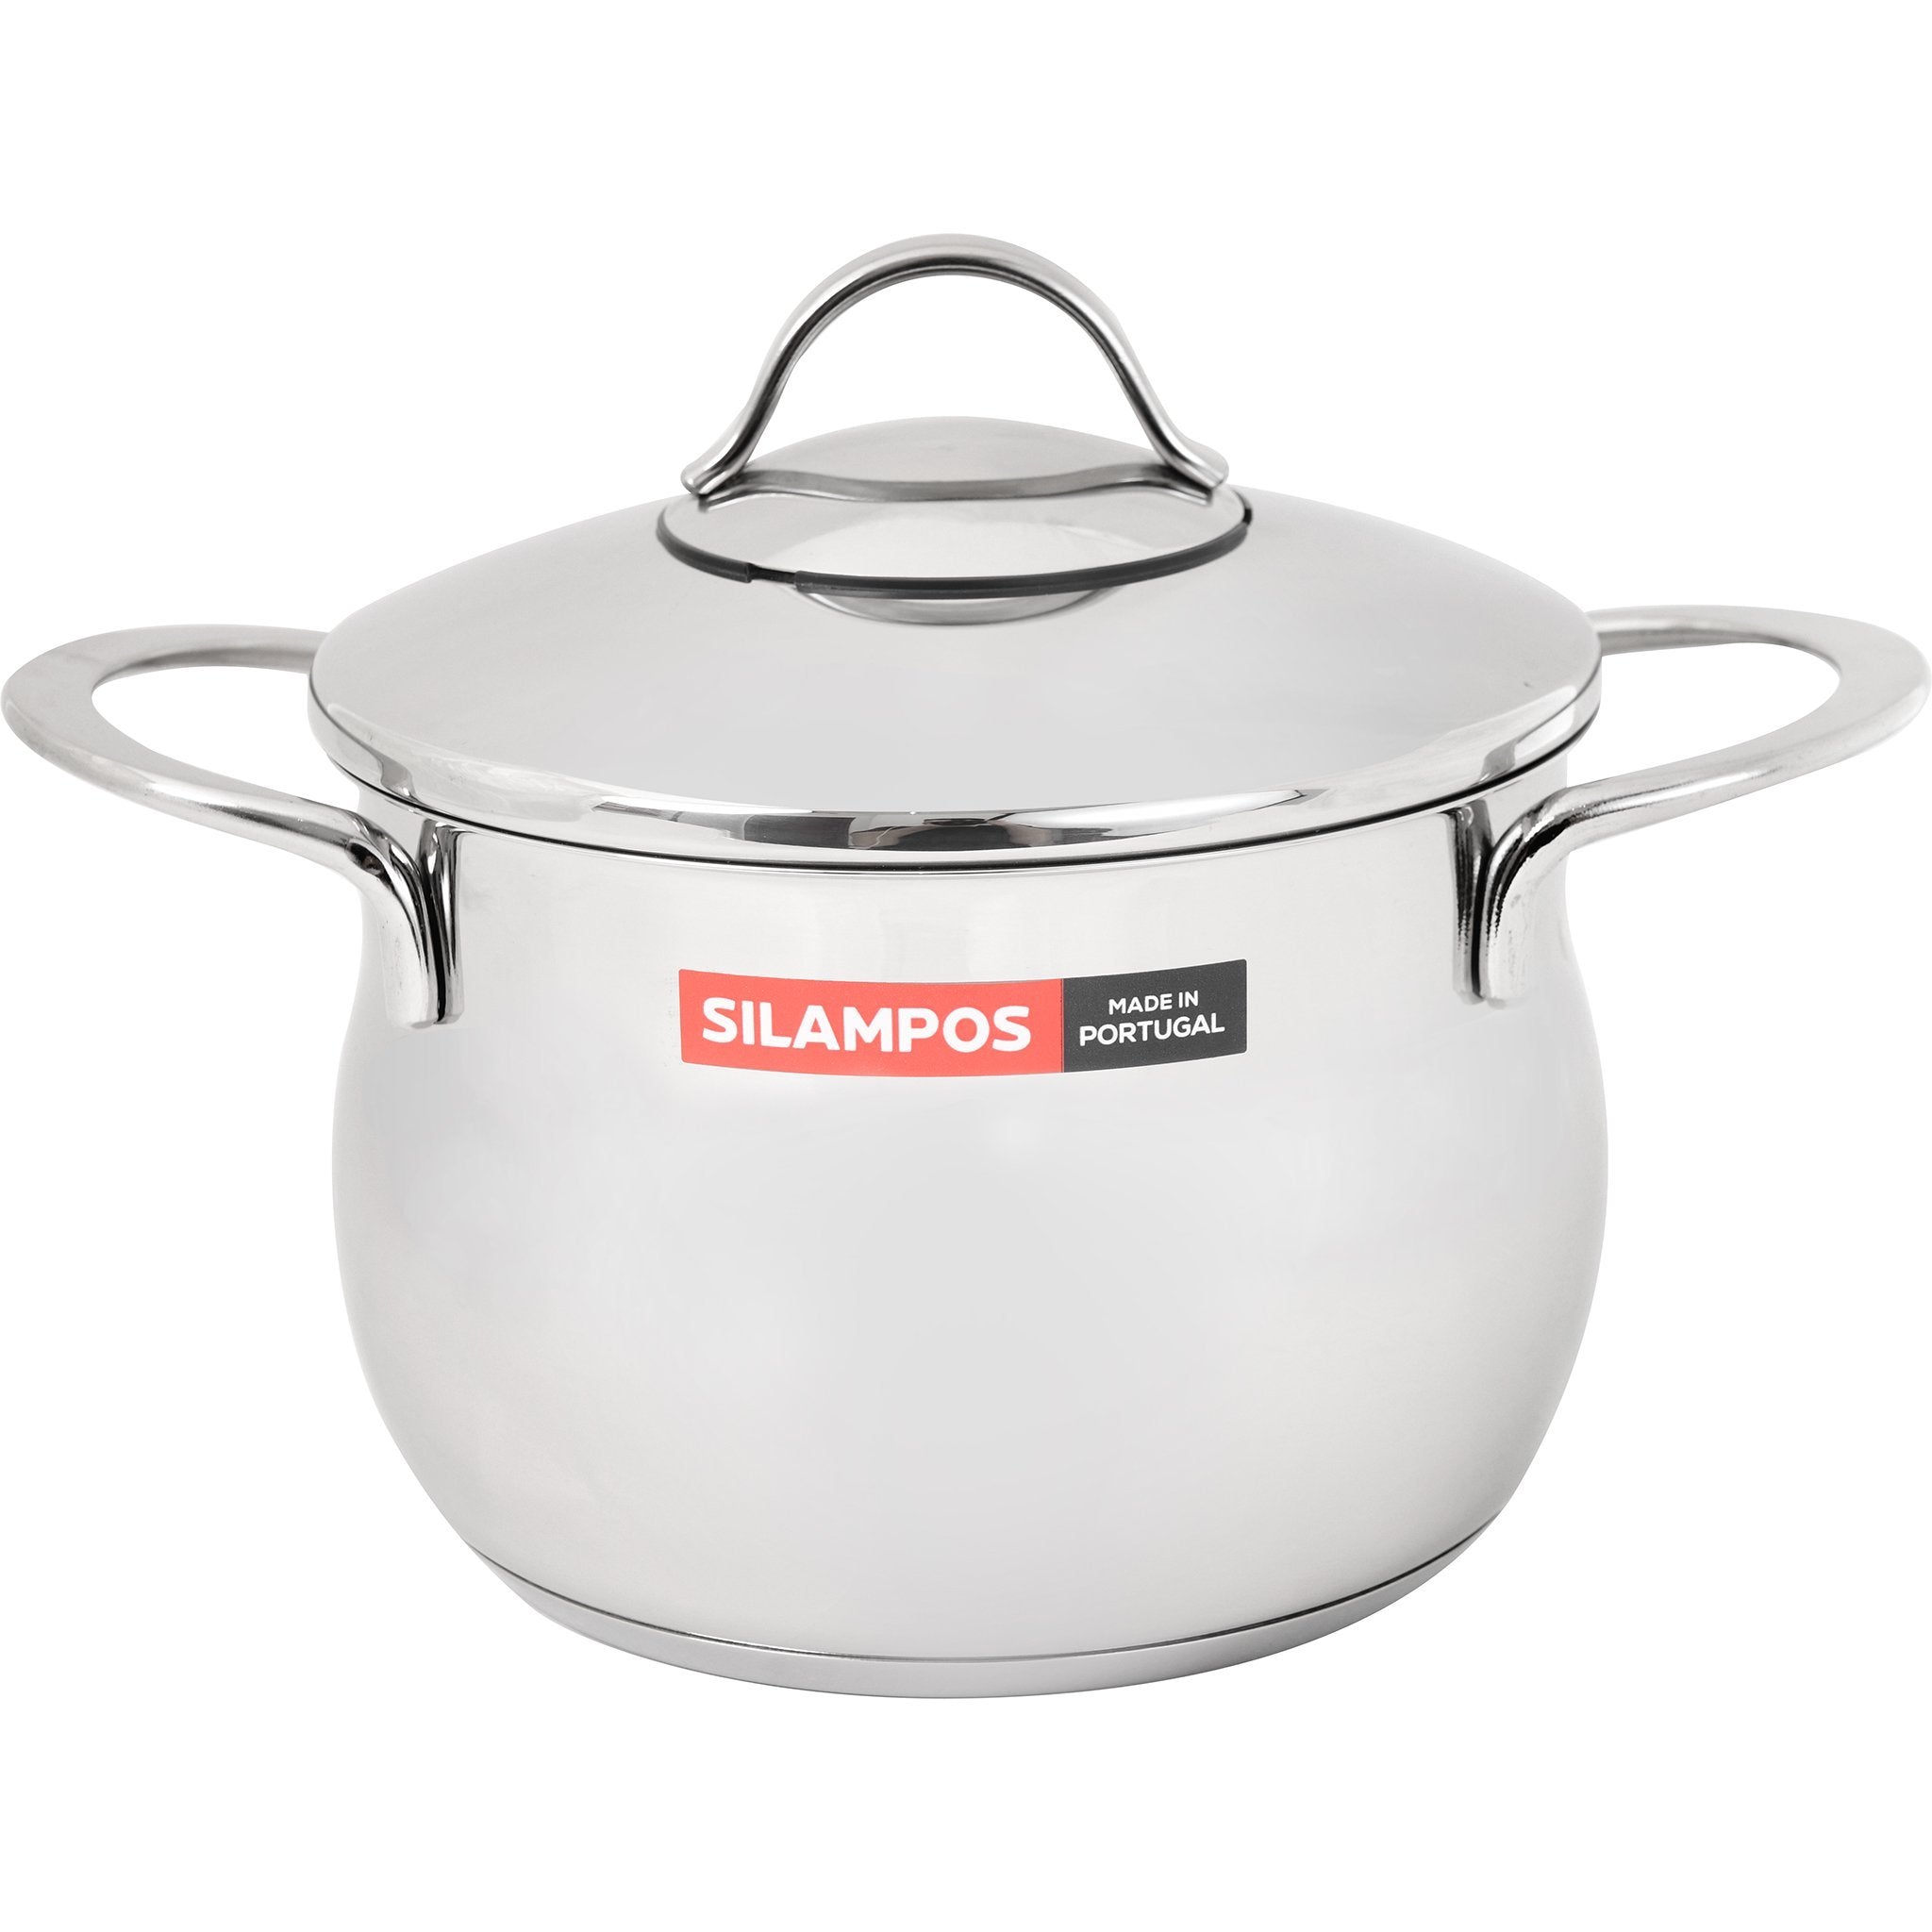 Silampos - Stainless Steel Pot with Cover 16cm - 1.6 Lit - 440001640